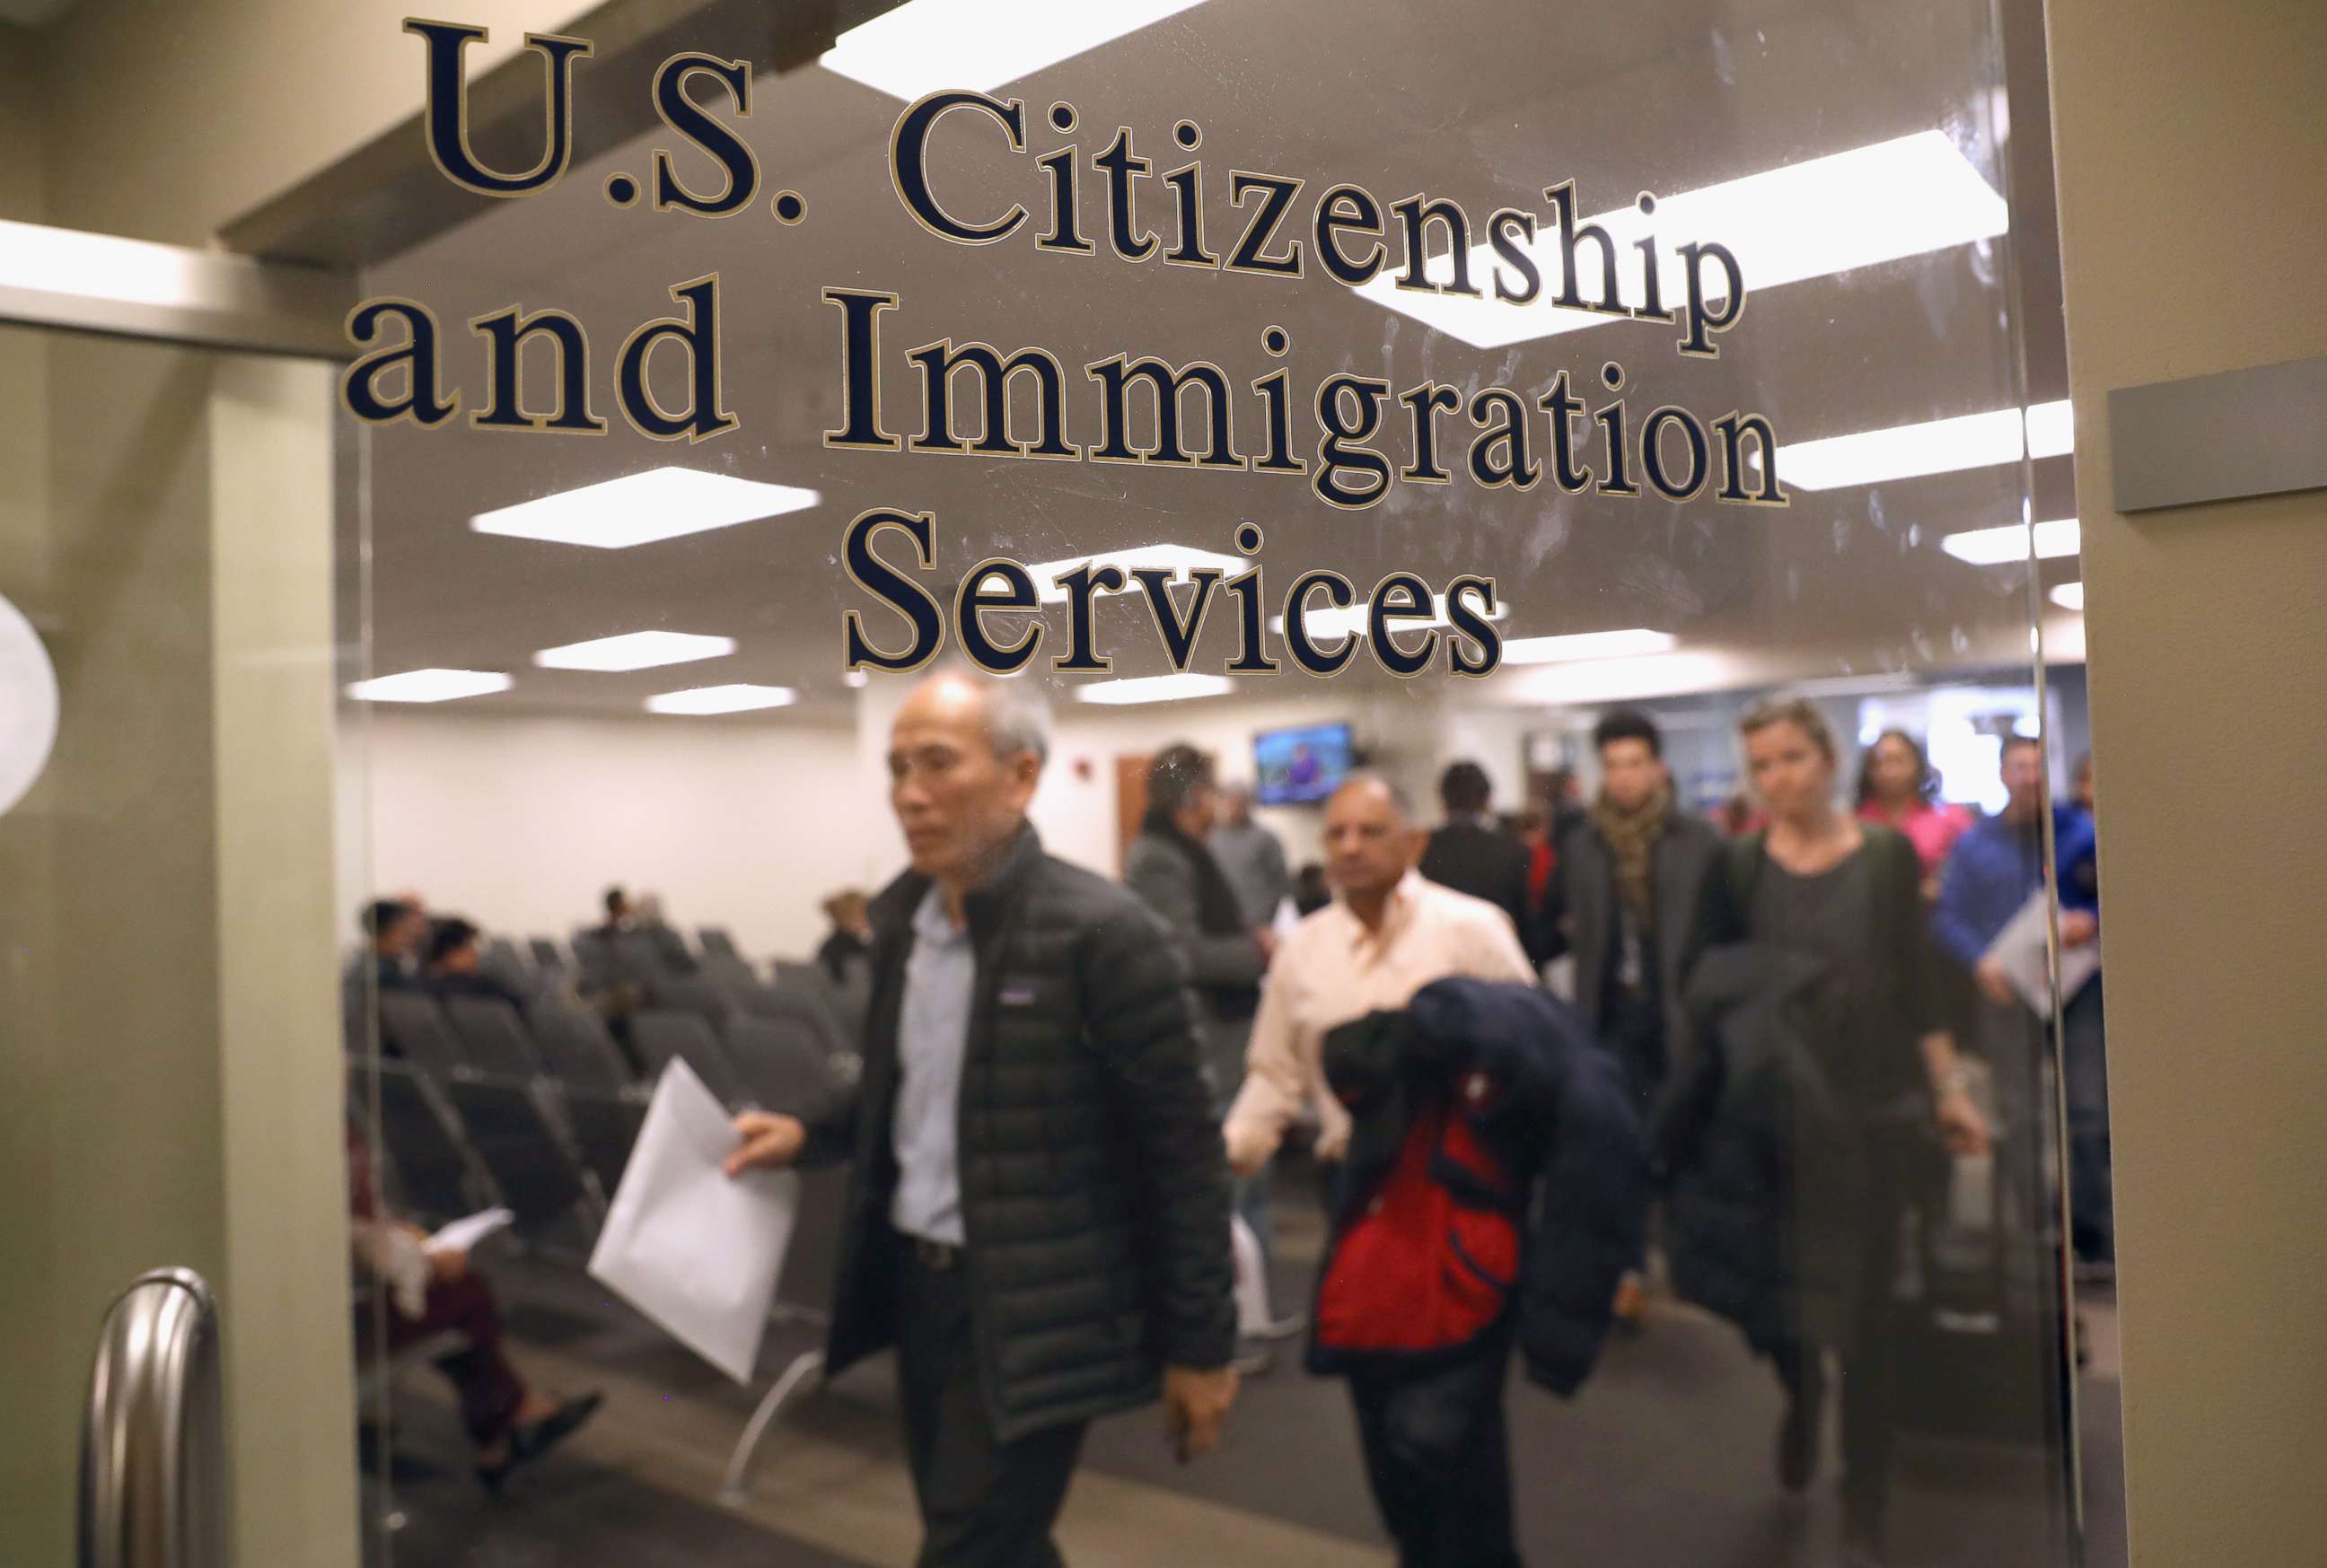 PHOTO: Immigrants prepare to become American citizens at a naturalization service on January 22, 2018 in Newark, New Jersey.